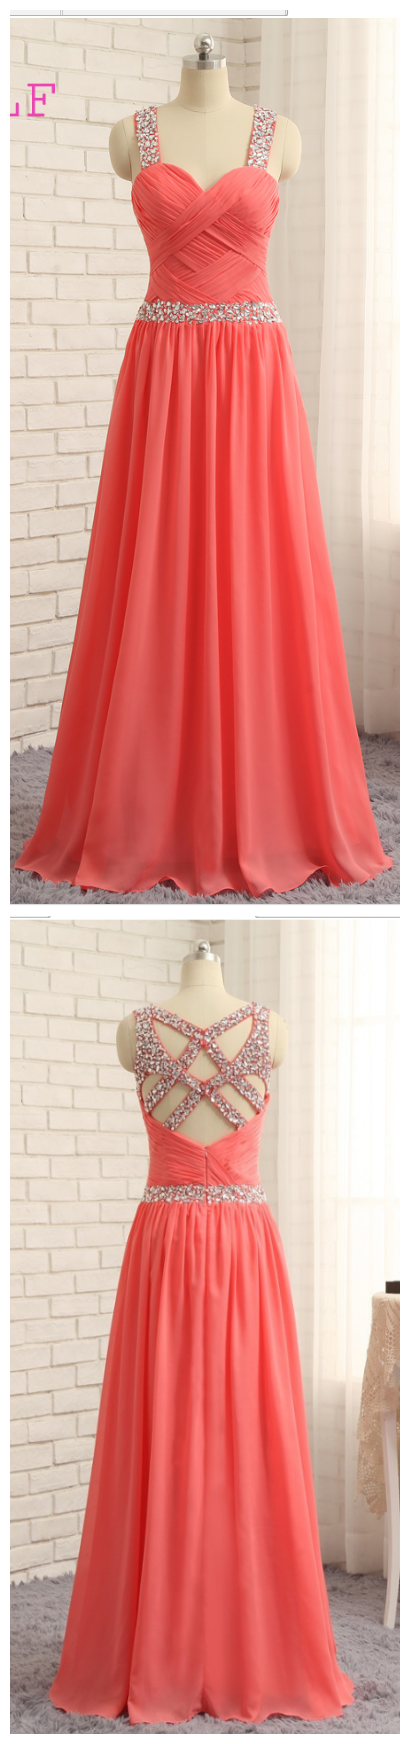 Prom Dresses, A-line Sweetheart Sexy Chiffon Beaded Long Prom Gown ,evening Dresses, Evening Gown